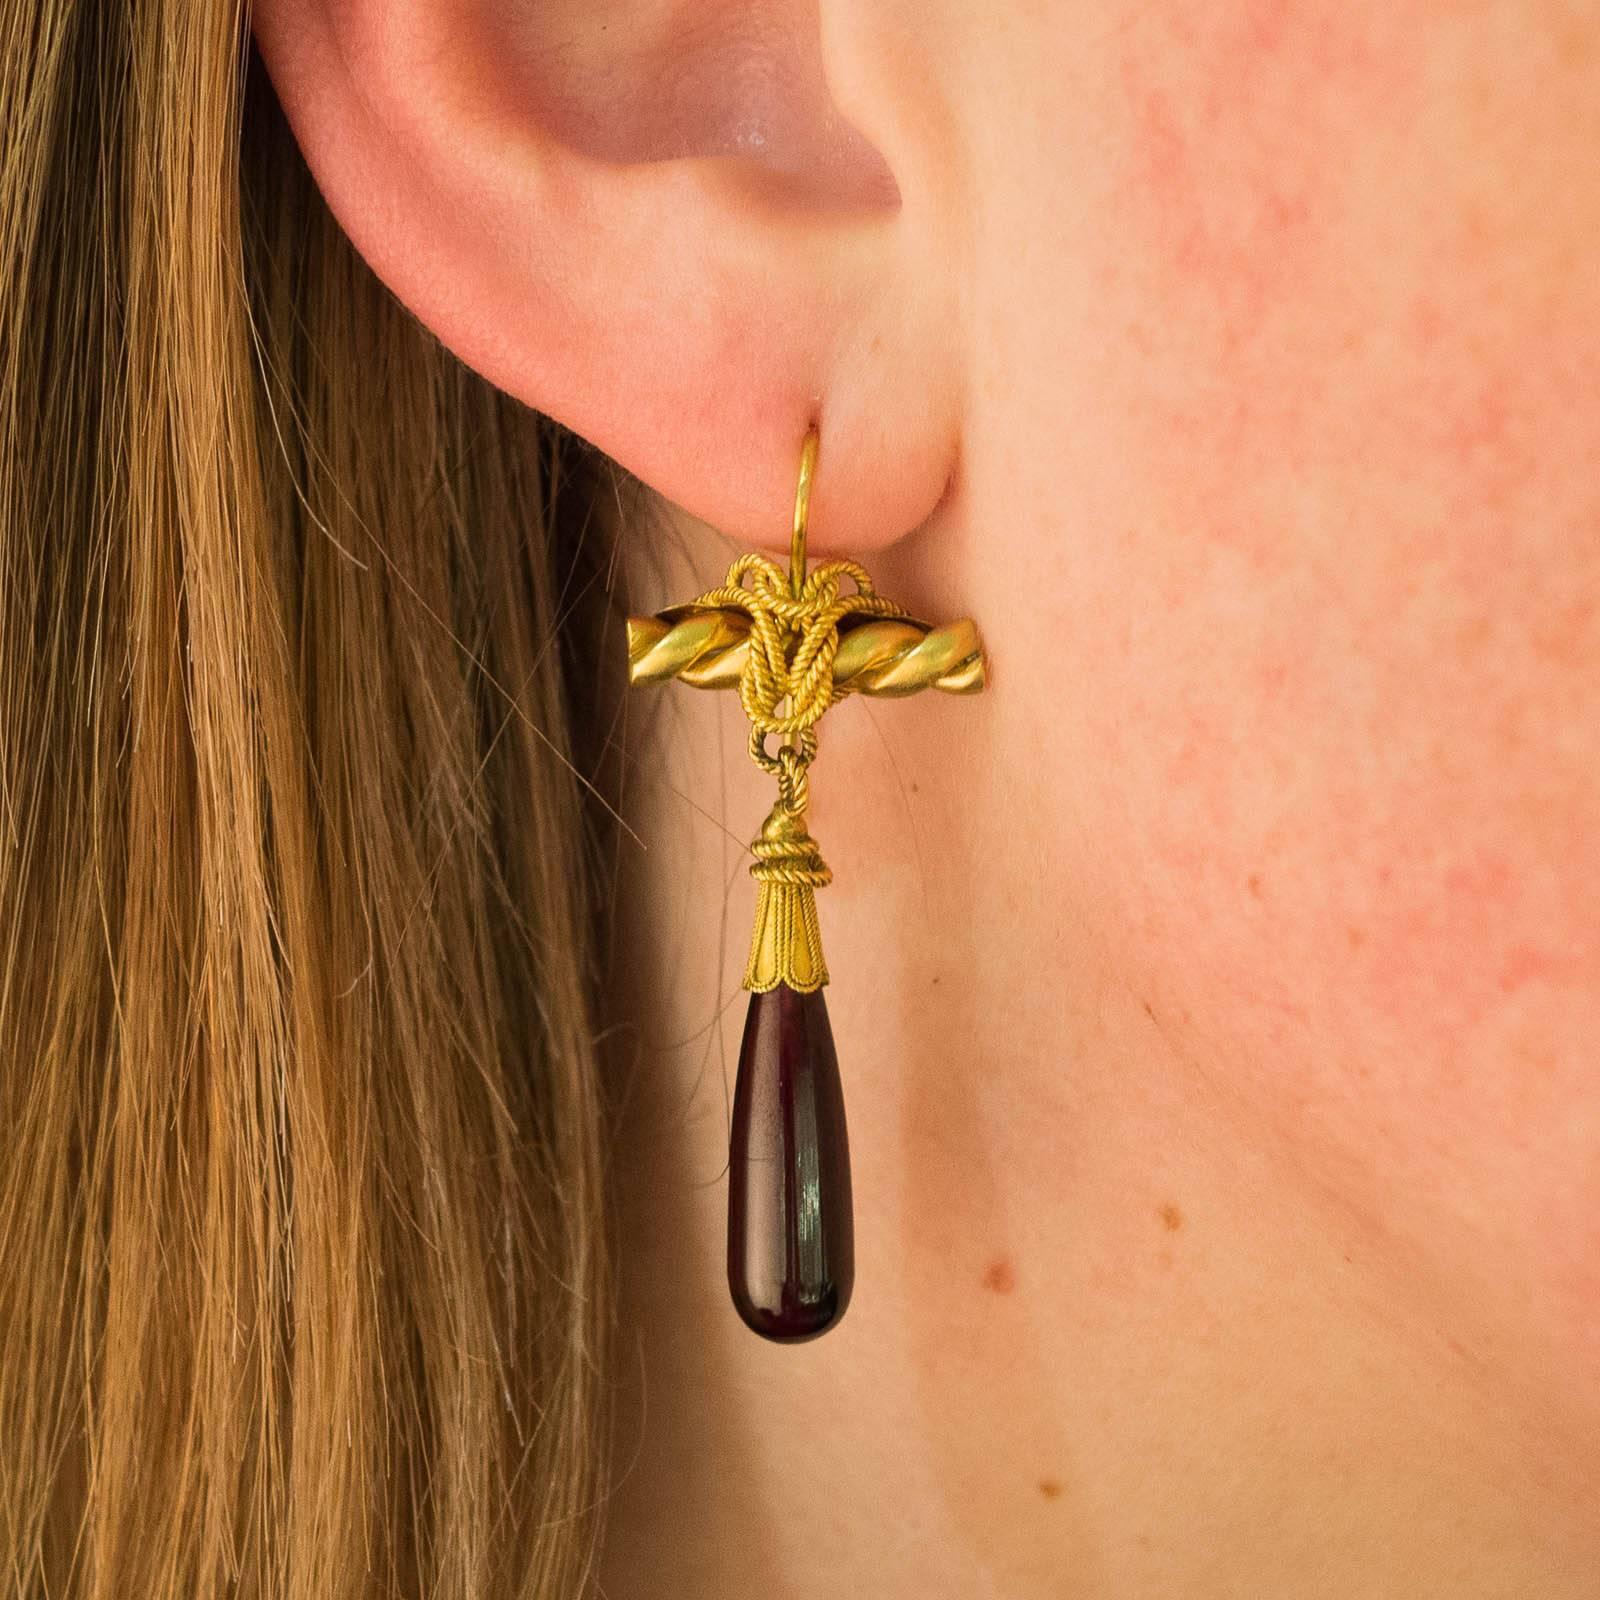 Antique Victorian Gold Drop Earrings with Ropework and Garnets For Sale 3